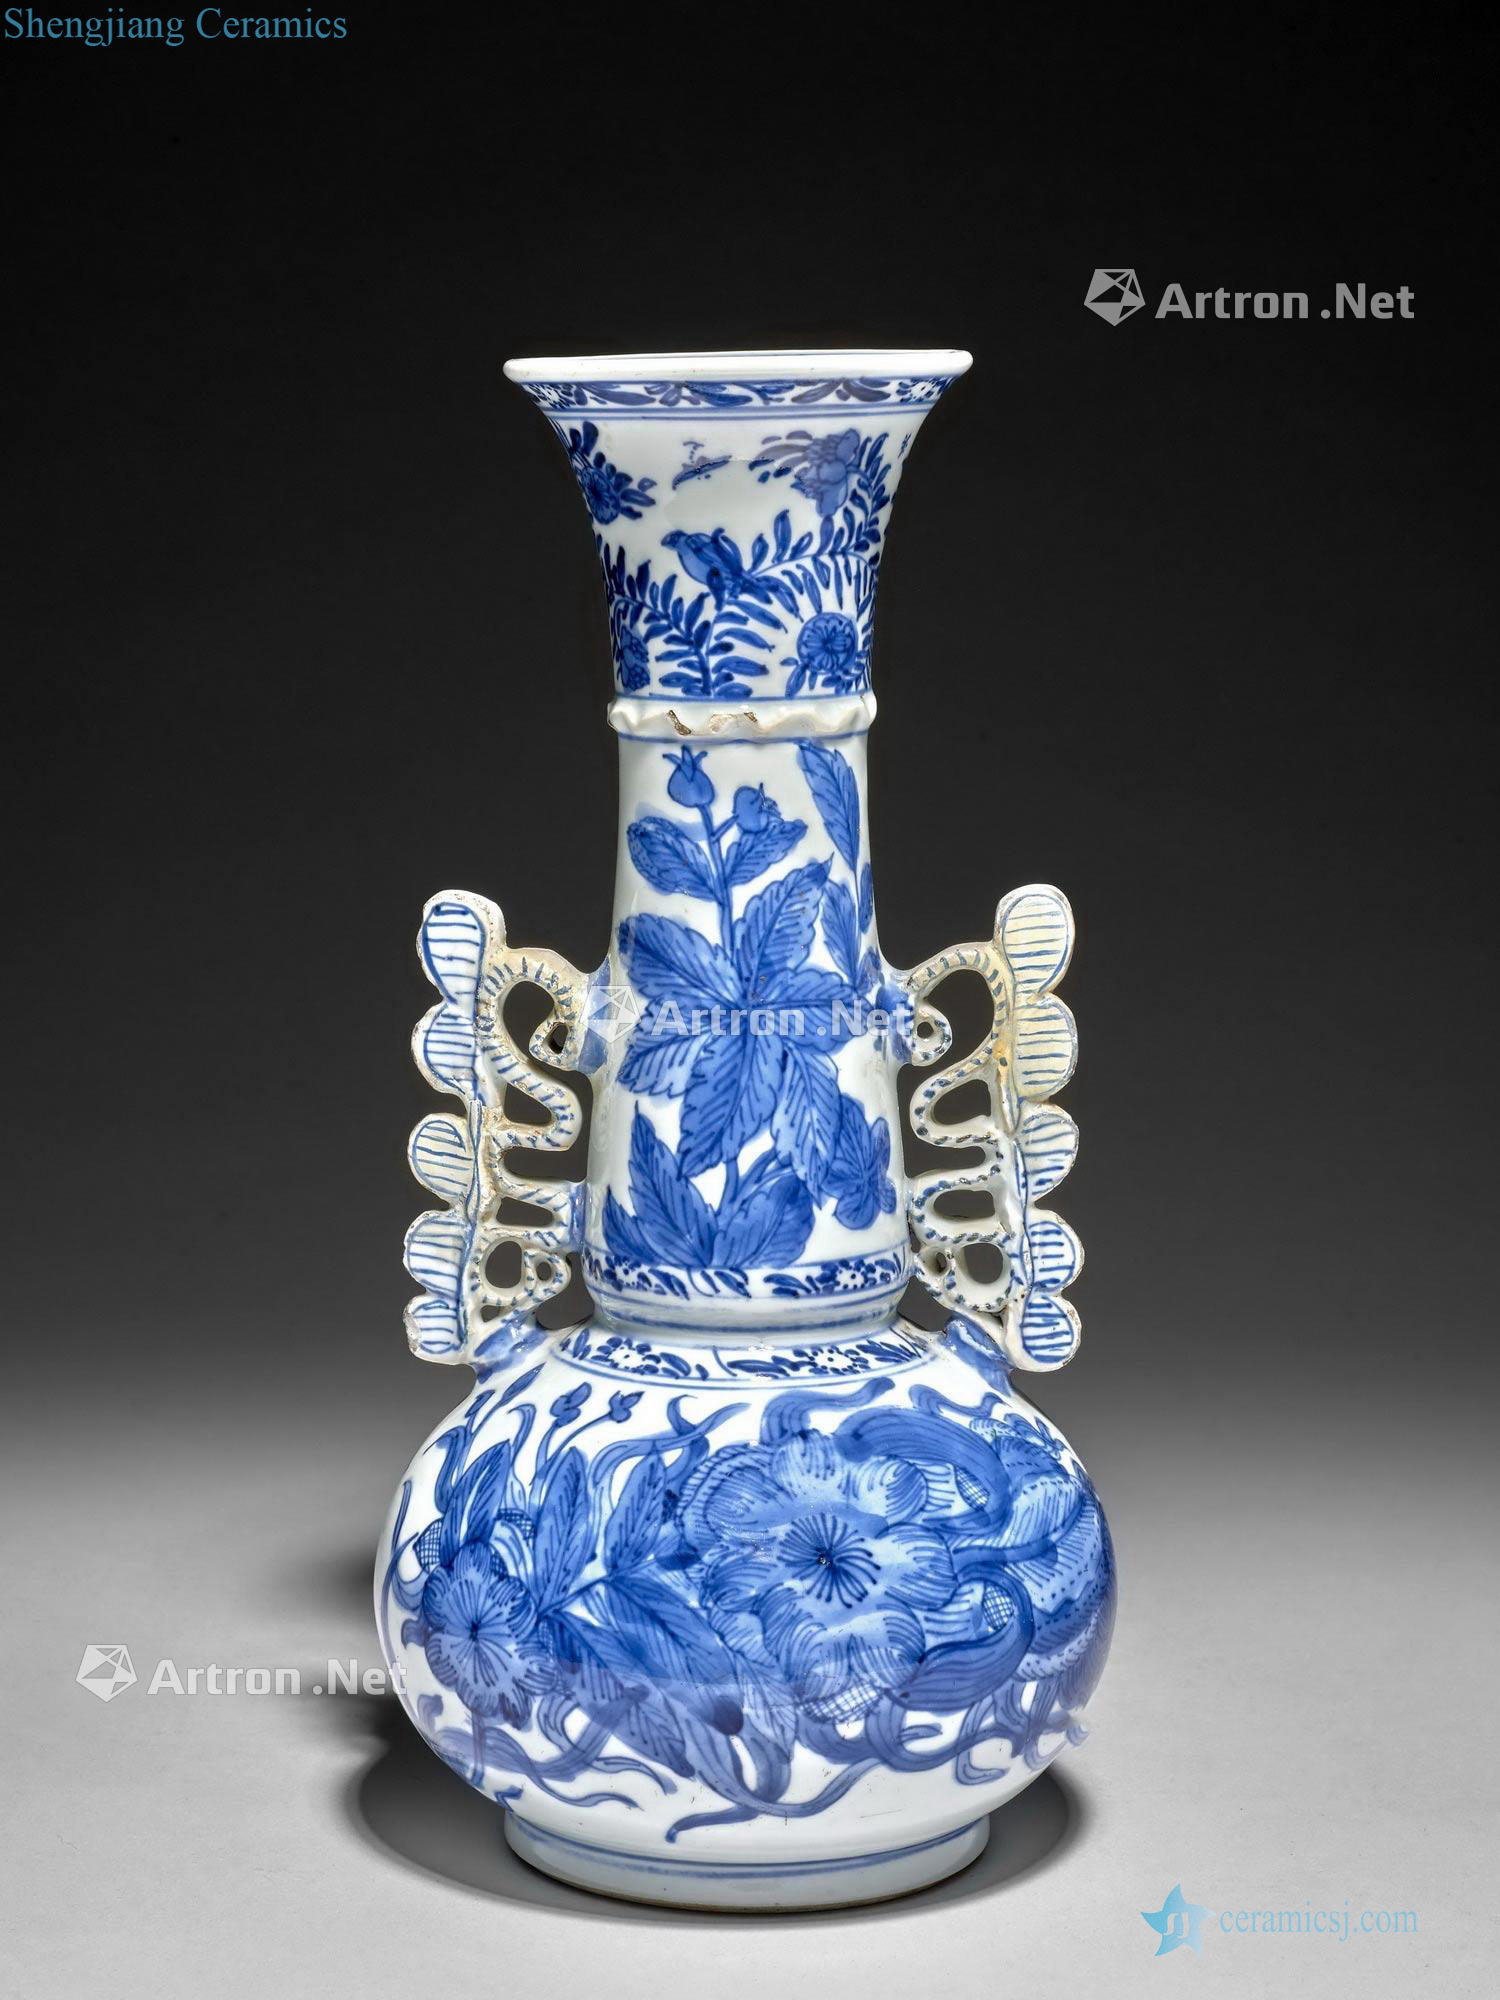 China, the Qing dynasty, 18 th century A blue and white porcelain vase